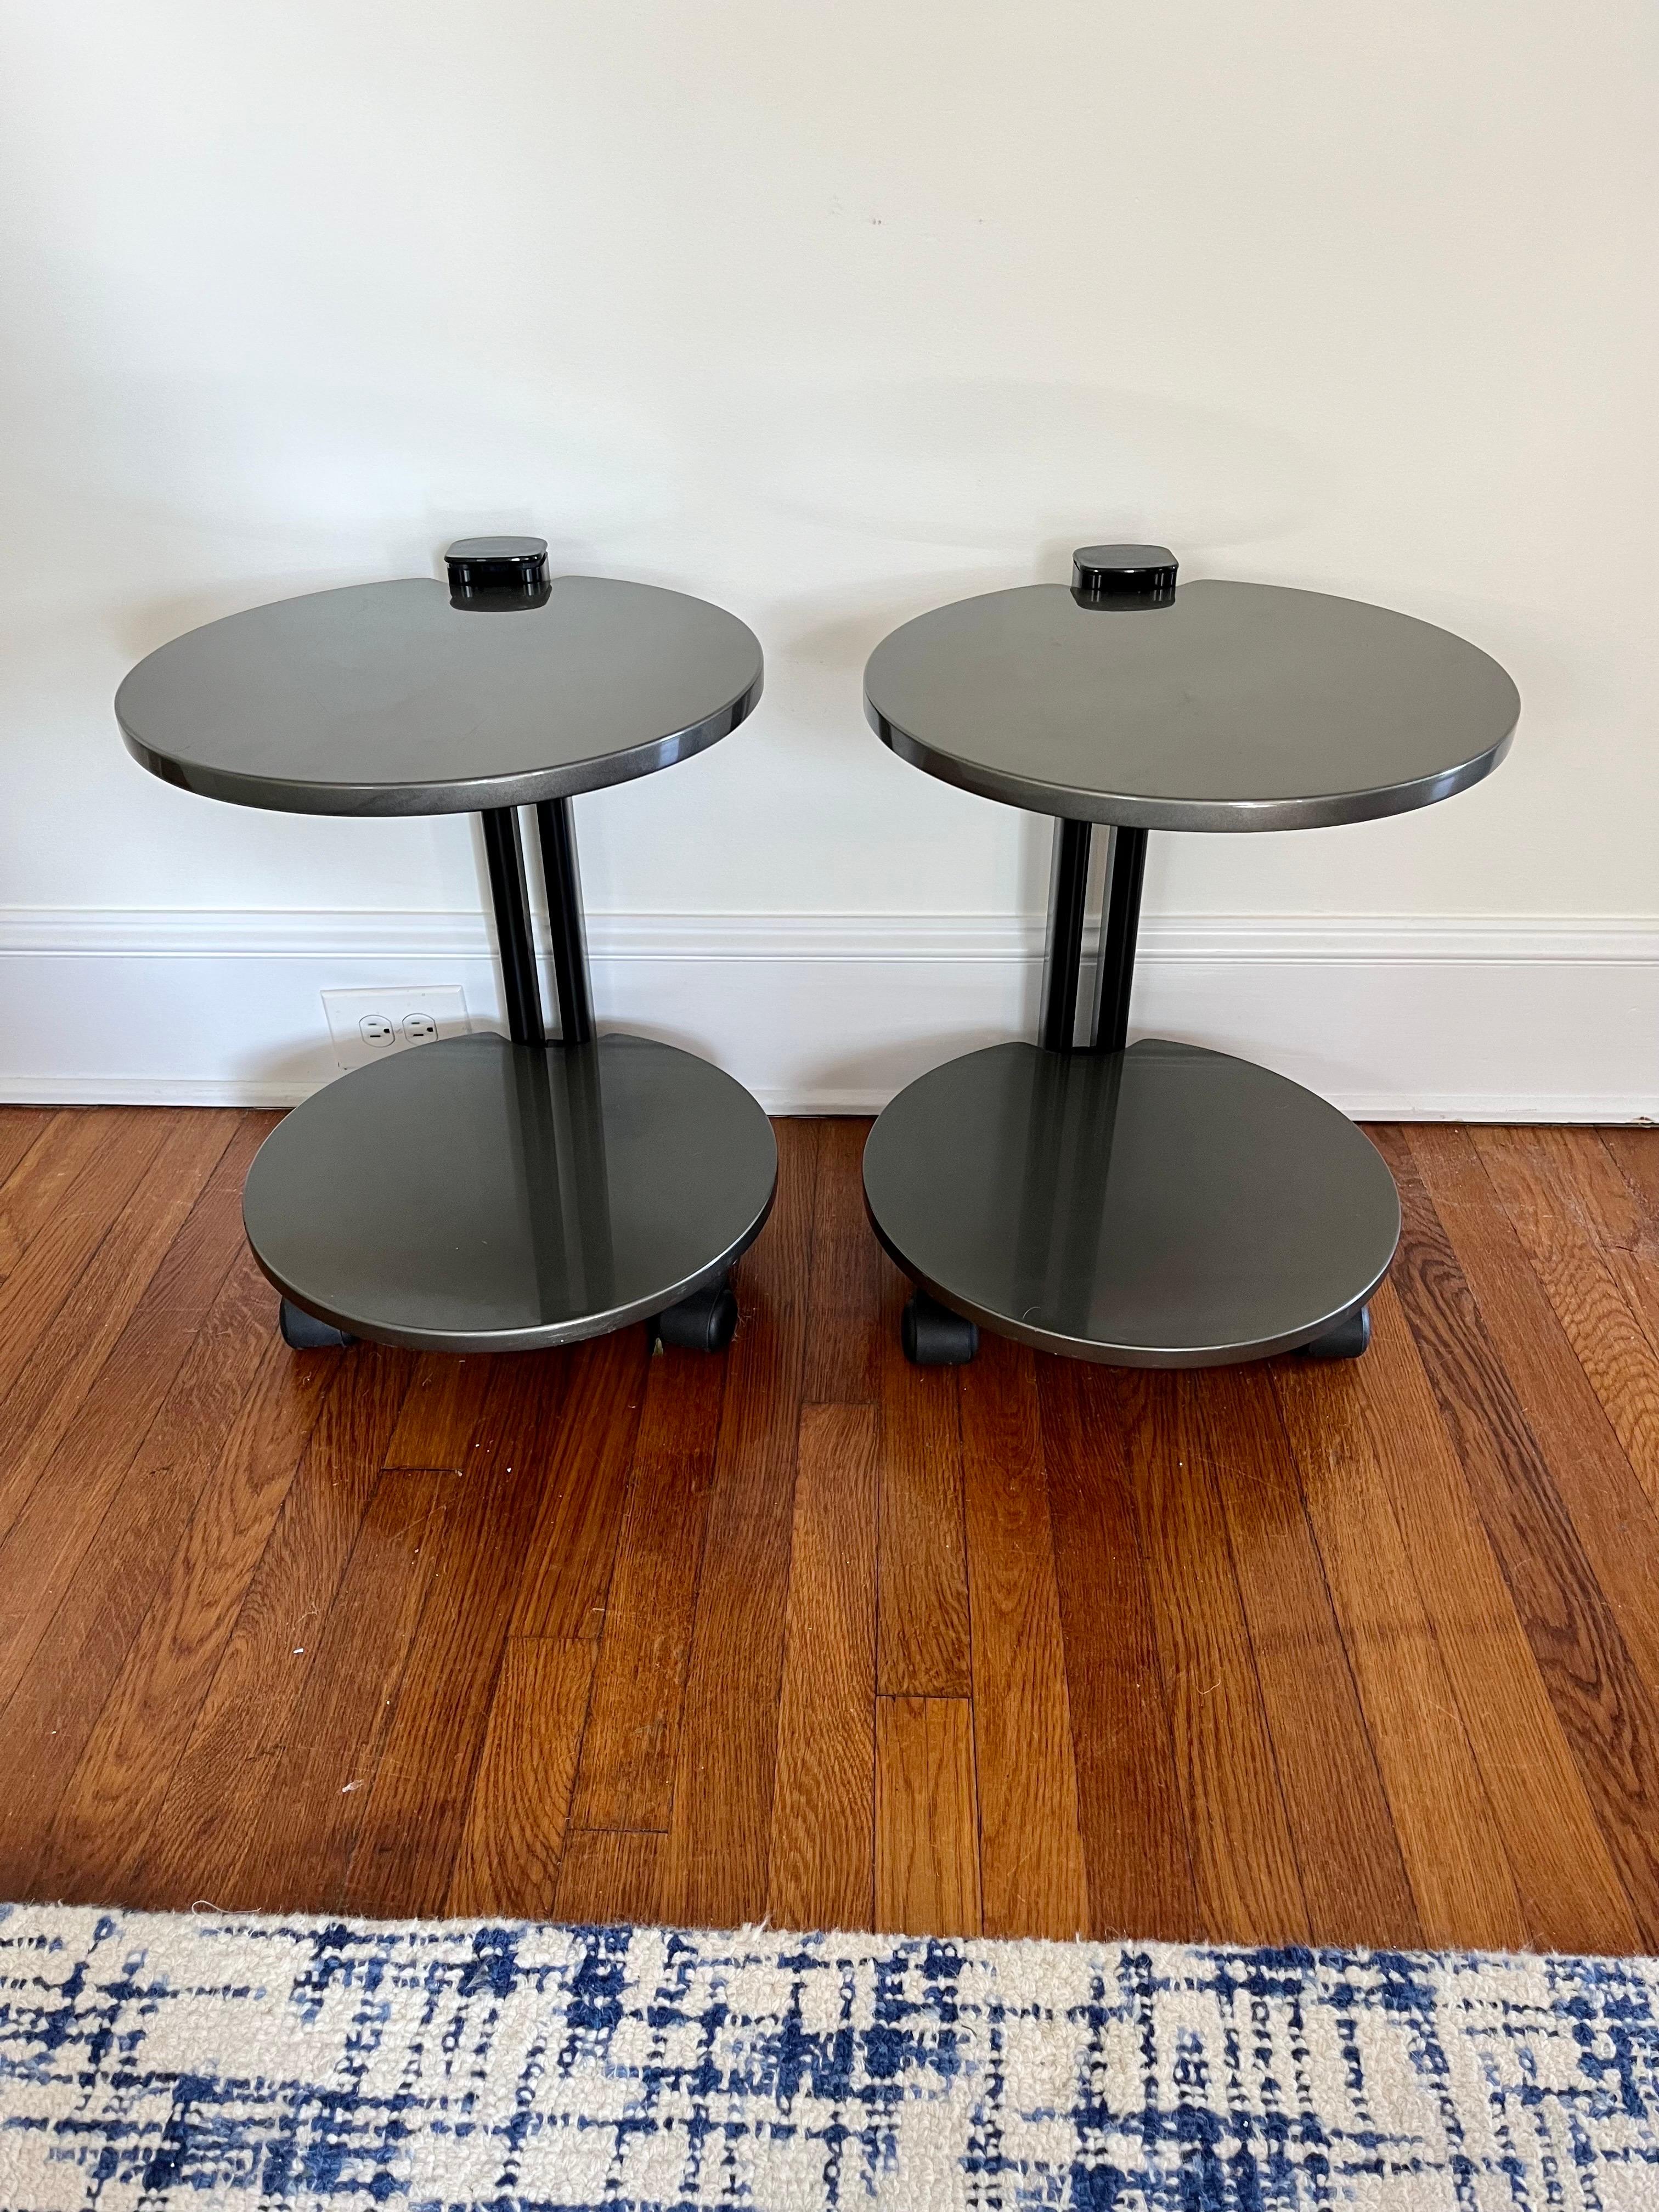 Post-Modern mixed media two tier side table, the round top and lower tier suspended by a column support. Lacquer metal surfaces with matte black supports. 2 casters and one stationary support to allow in place pivoting. 
Curbside to NYC/Philly $350